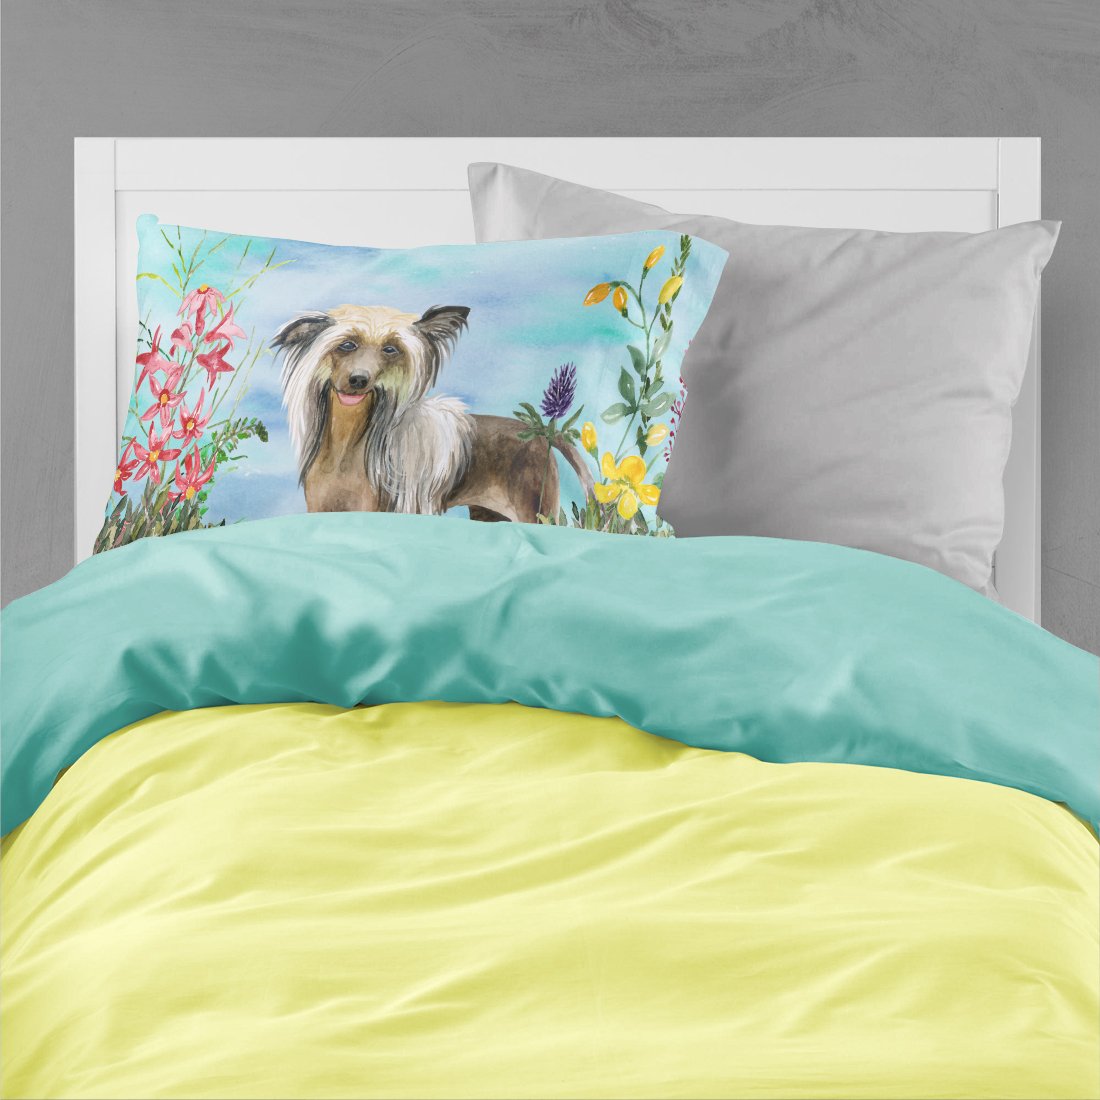 Chinese Crested Spring Fabric Standard Pillowcase CK1221PILLOWCASE by Caroline's Treasures